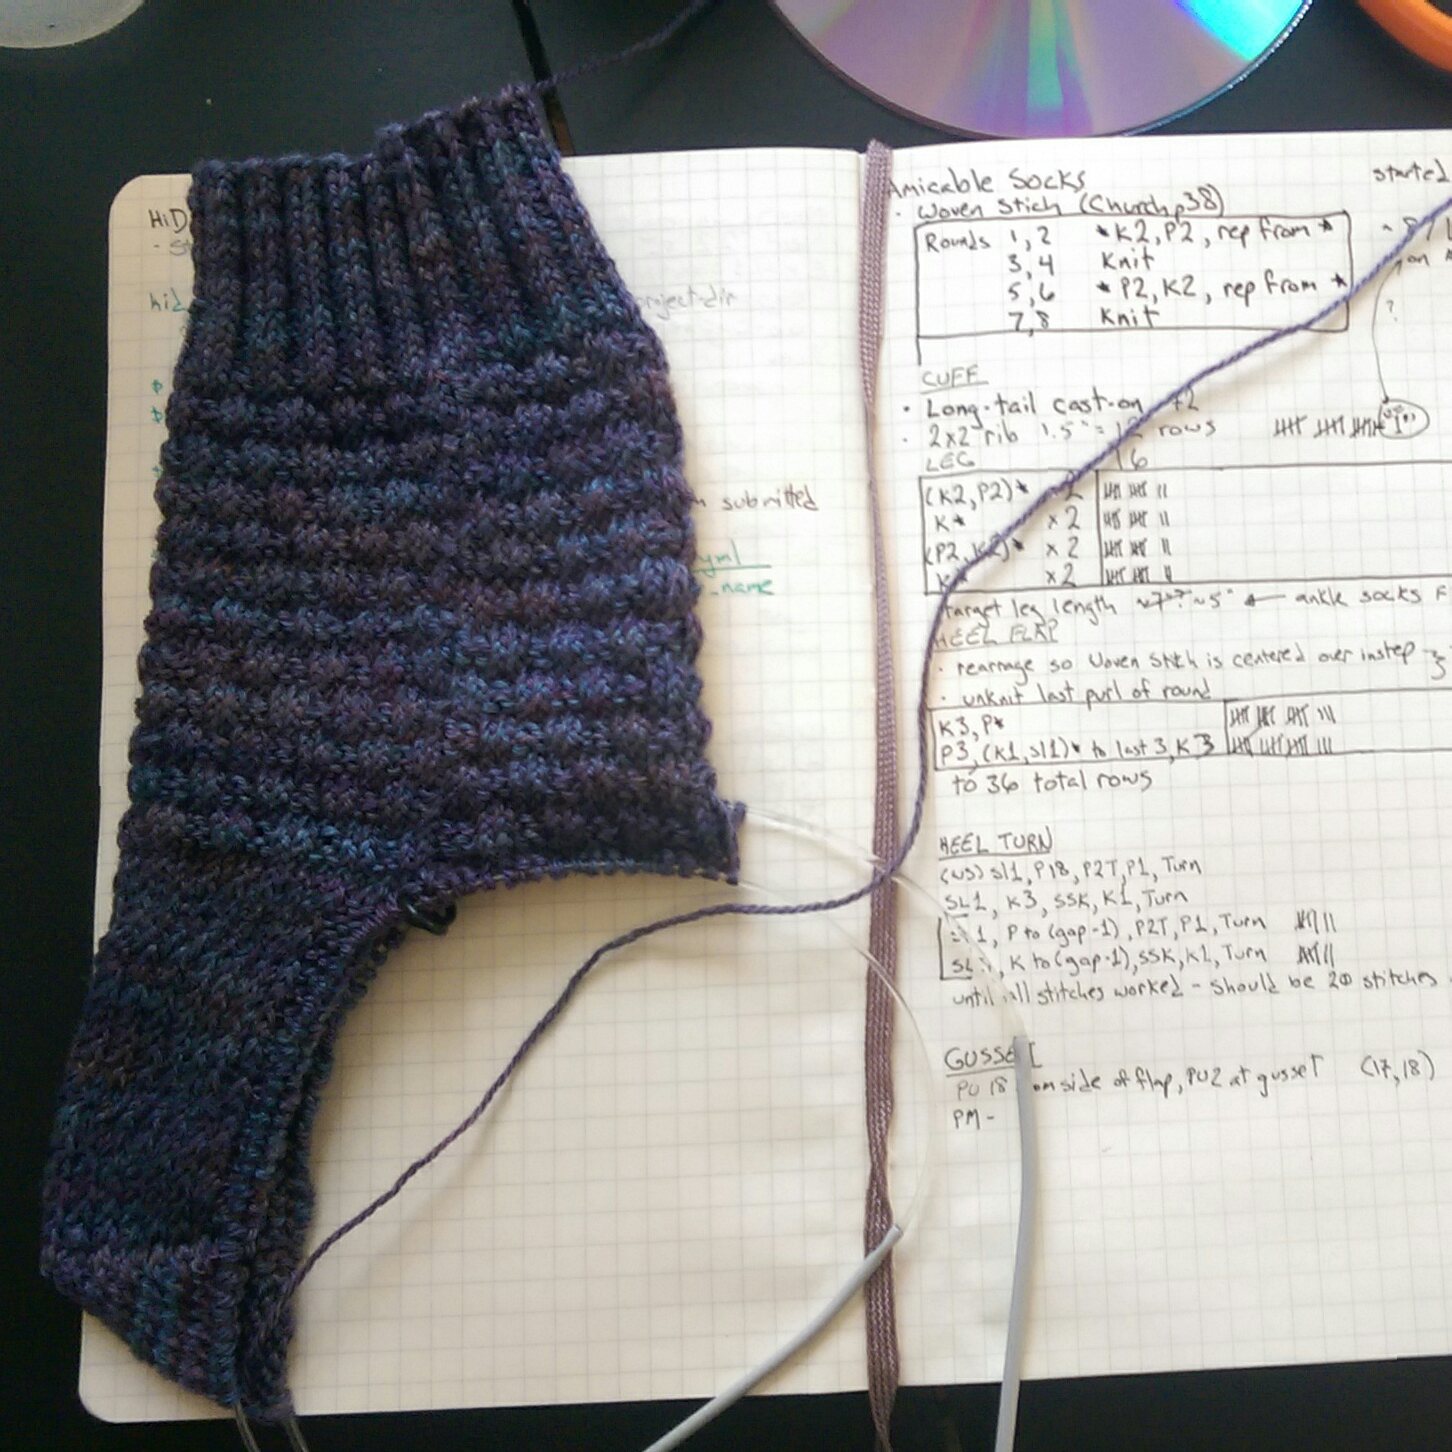 in-progress socks laid out on project page